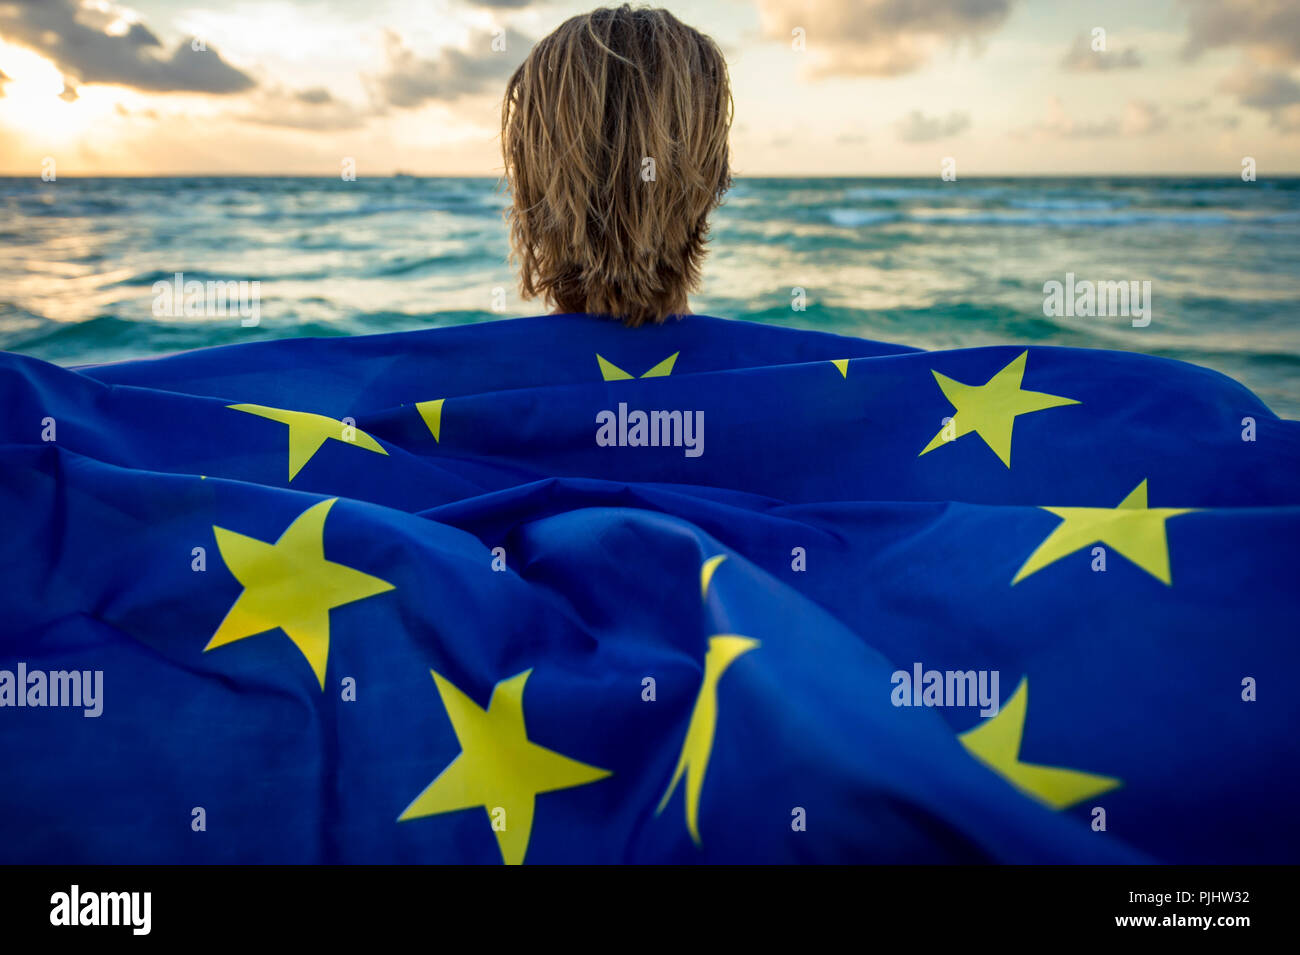 Man holding a fluttering iconic EU flag with circle of stars on beach at sunrise Stock Photo